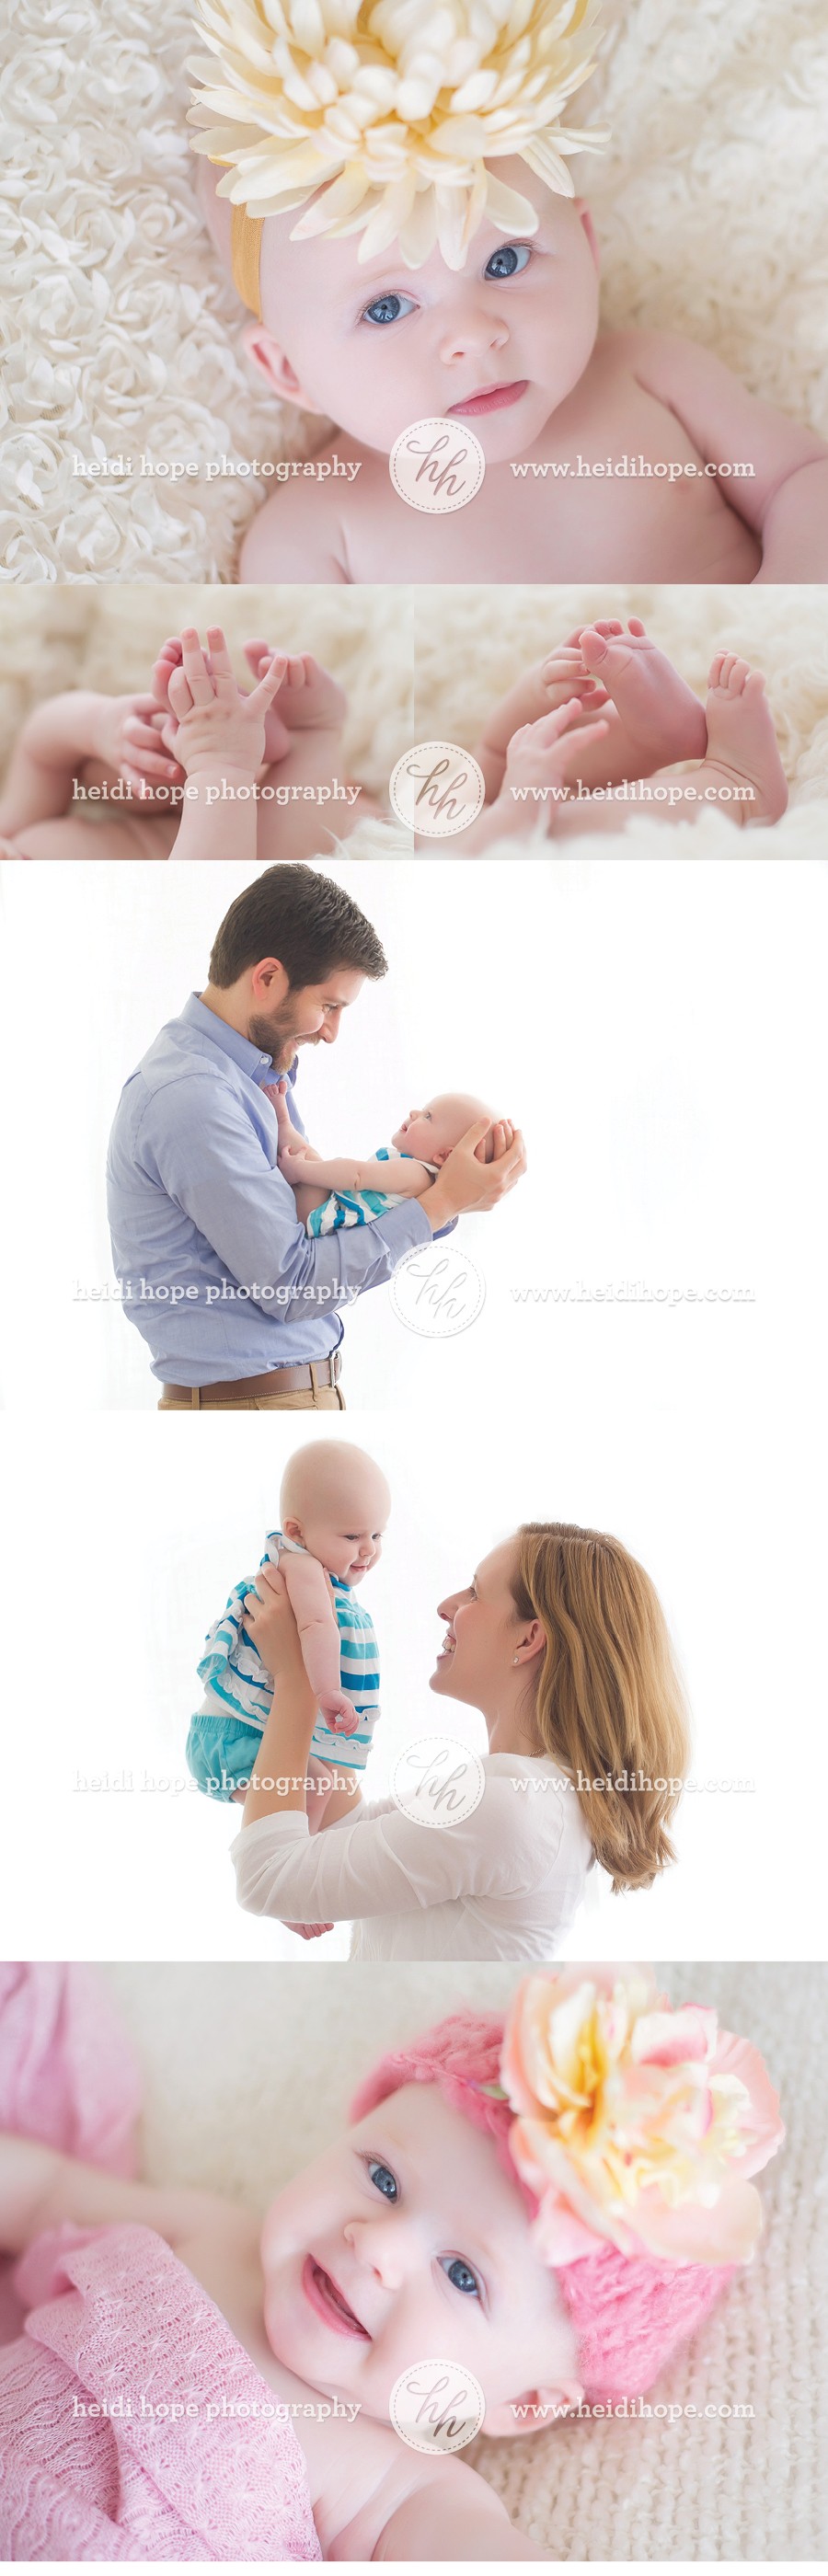 3 Month Old studio session with family by Heidi Hope Photography #3 months #baby #infant